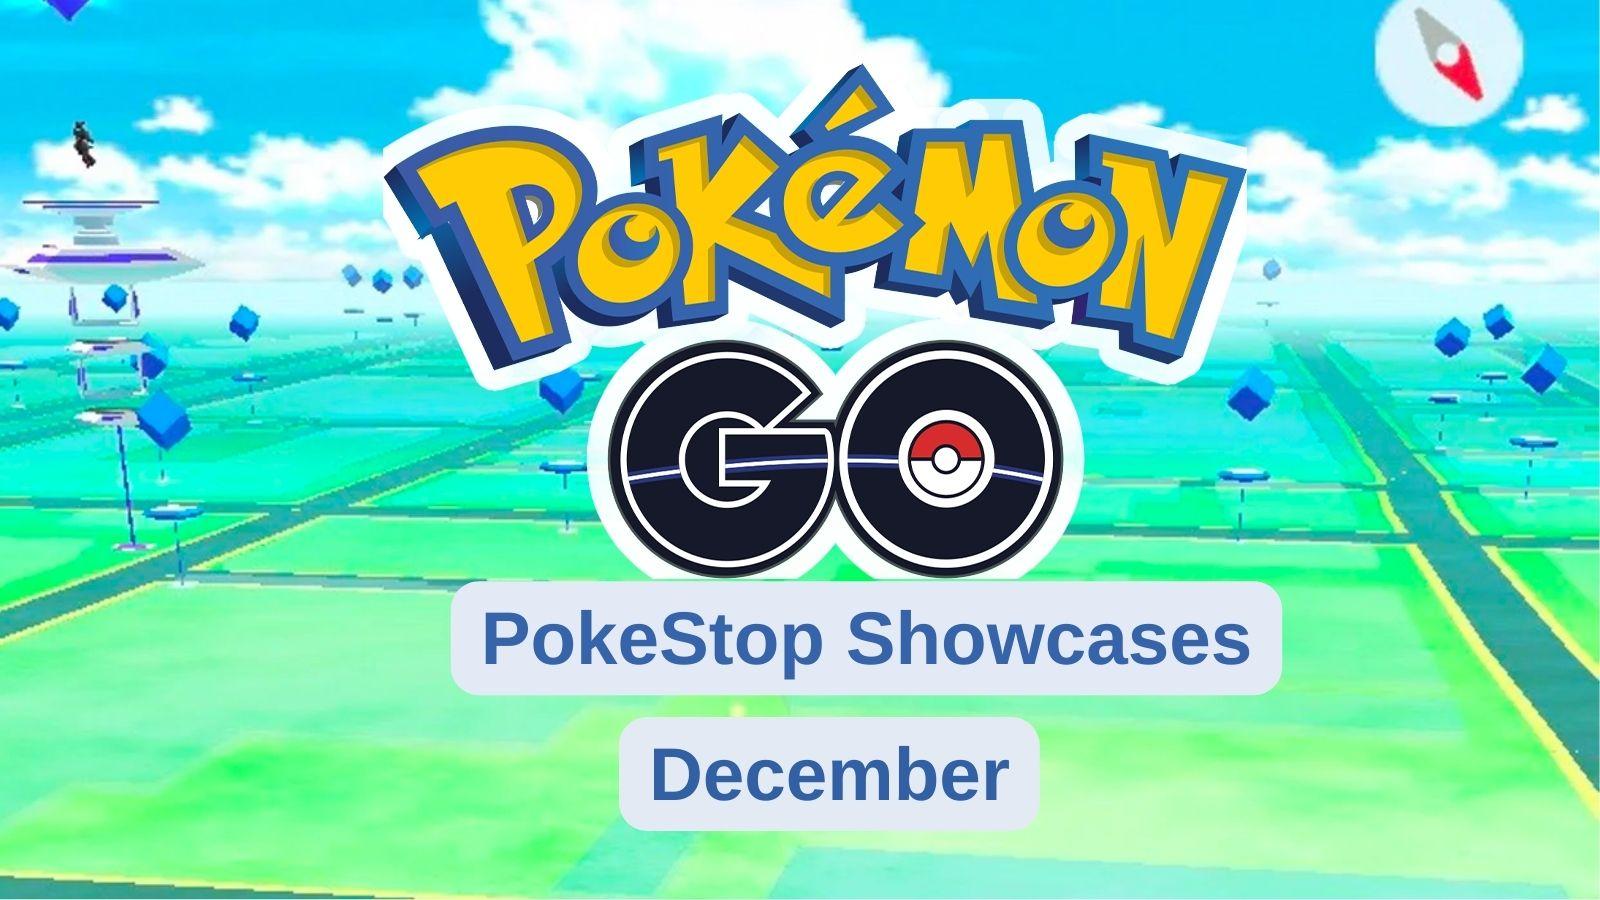 December Community Day 2021 Tips and Tricks